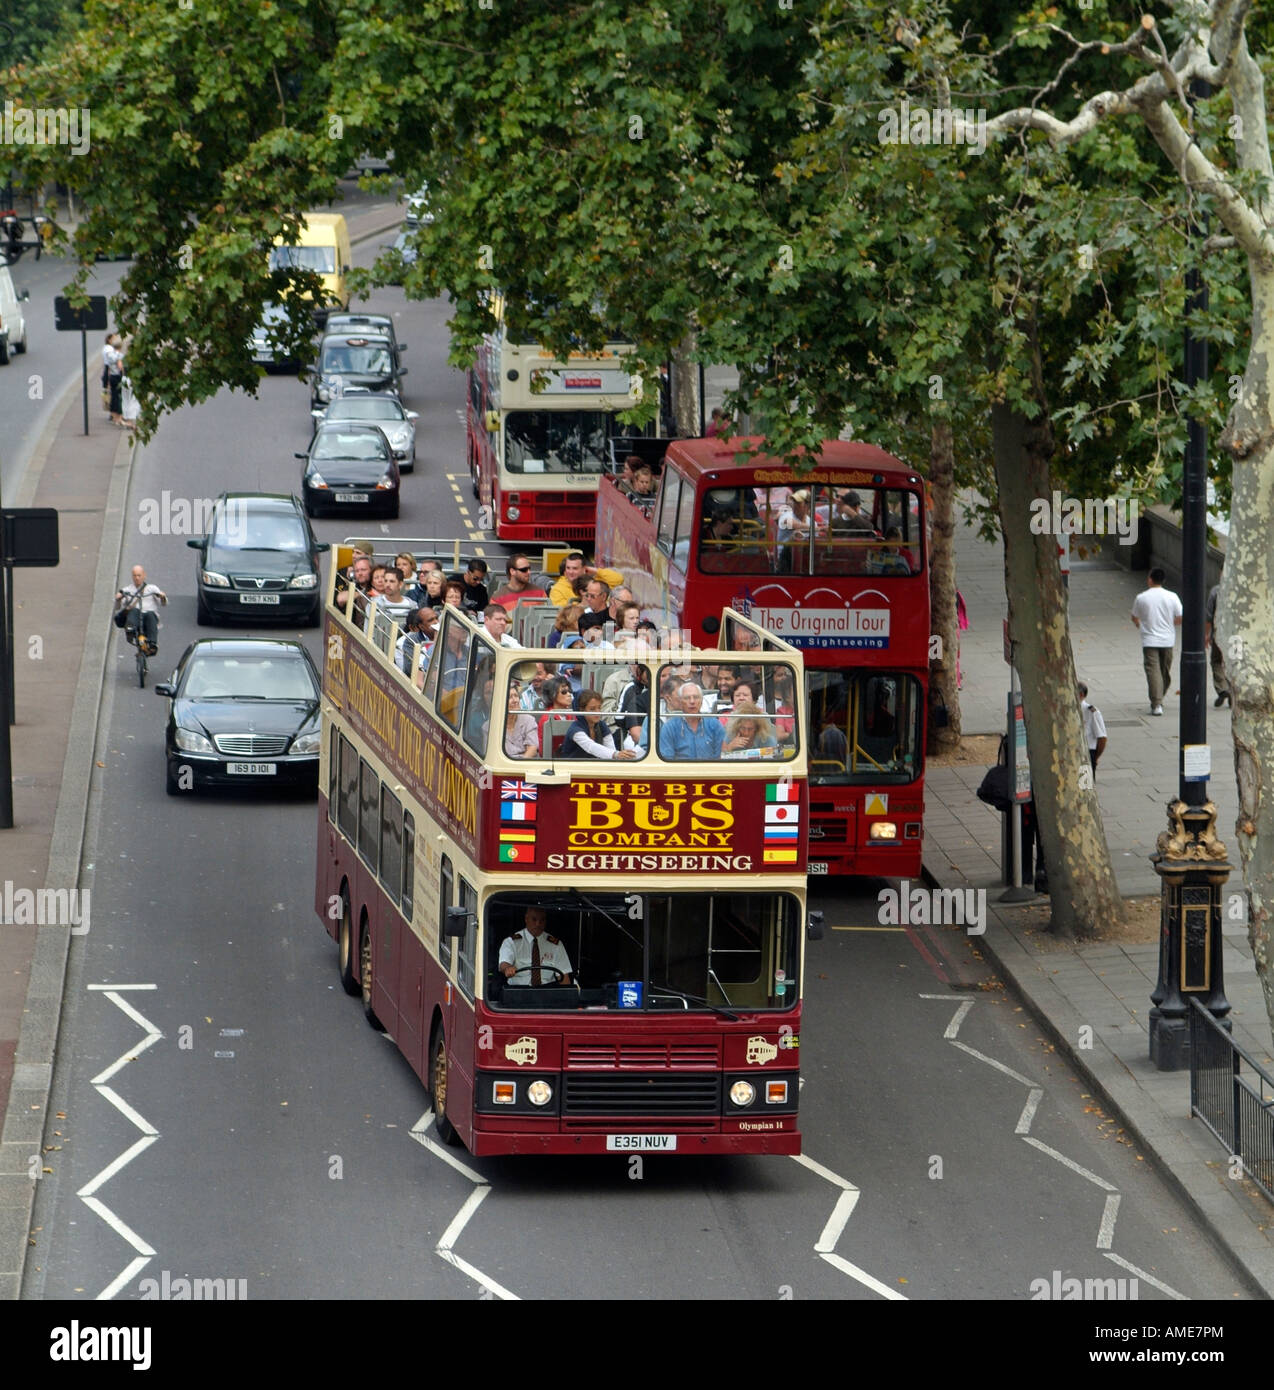 Sightseeing Double Decker Open Top Bus Touring London with Tourists Aboard Stock Photo